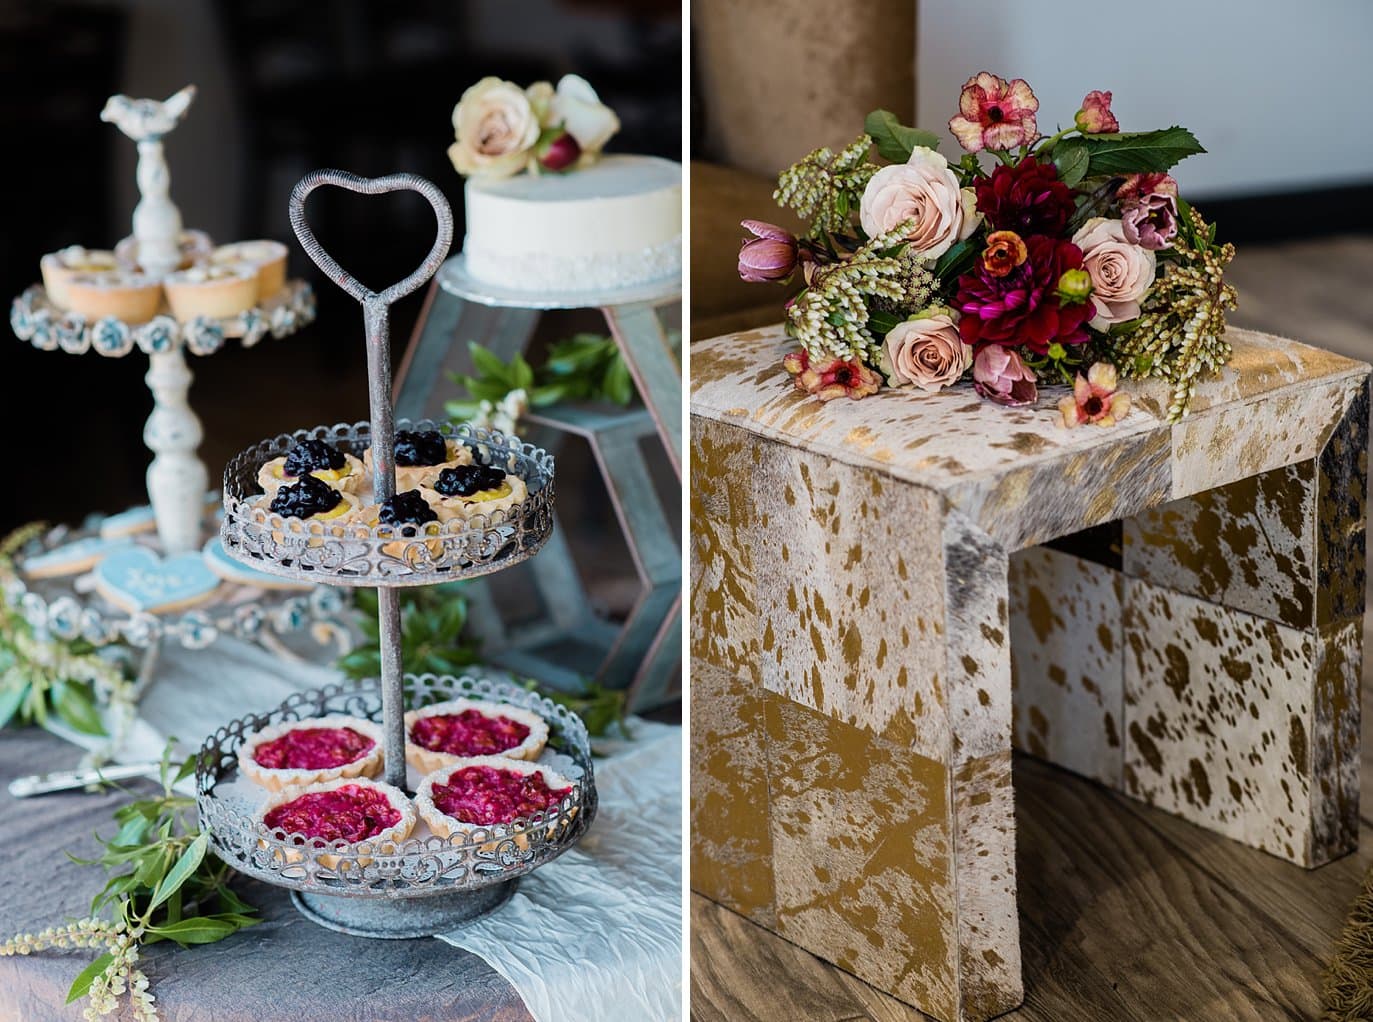 tart and cake display in bar area at Northgate Event Center wedding by Aurora wedding photographer Jennie Crate